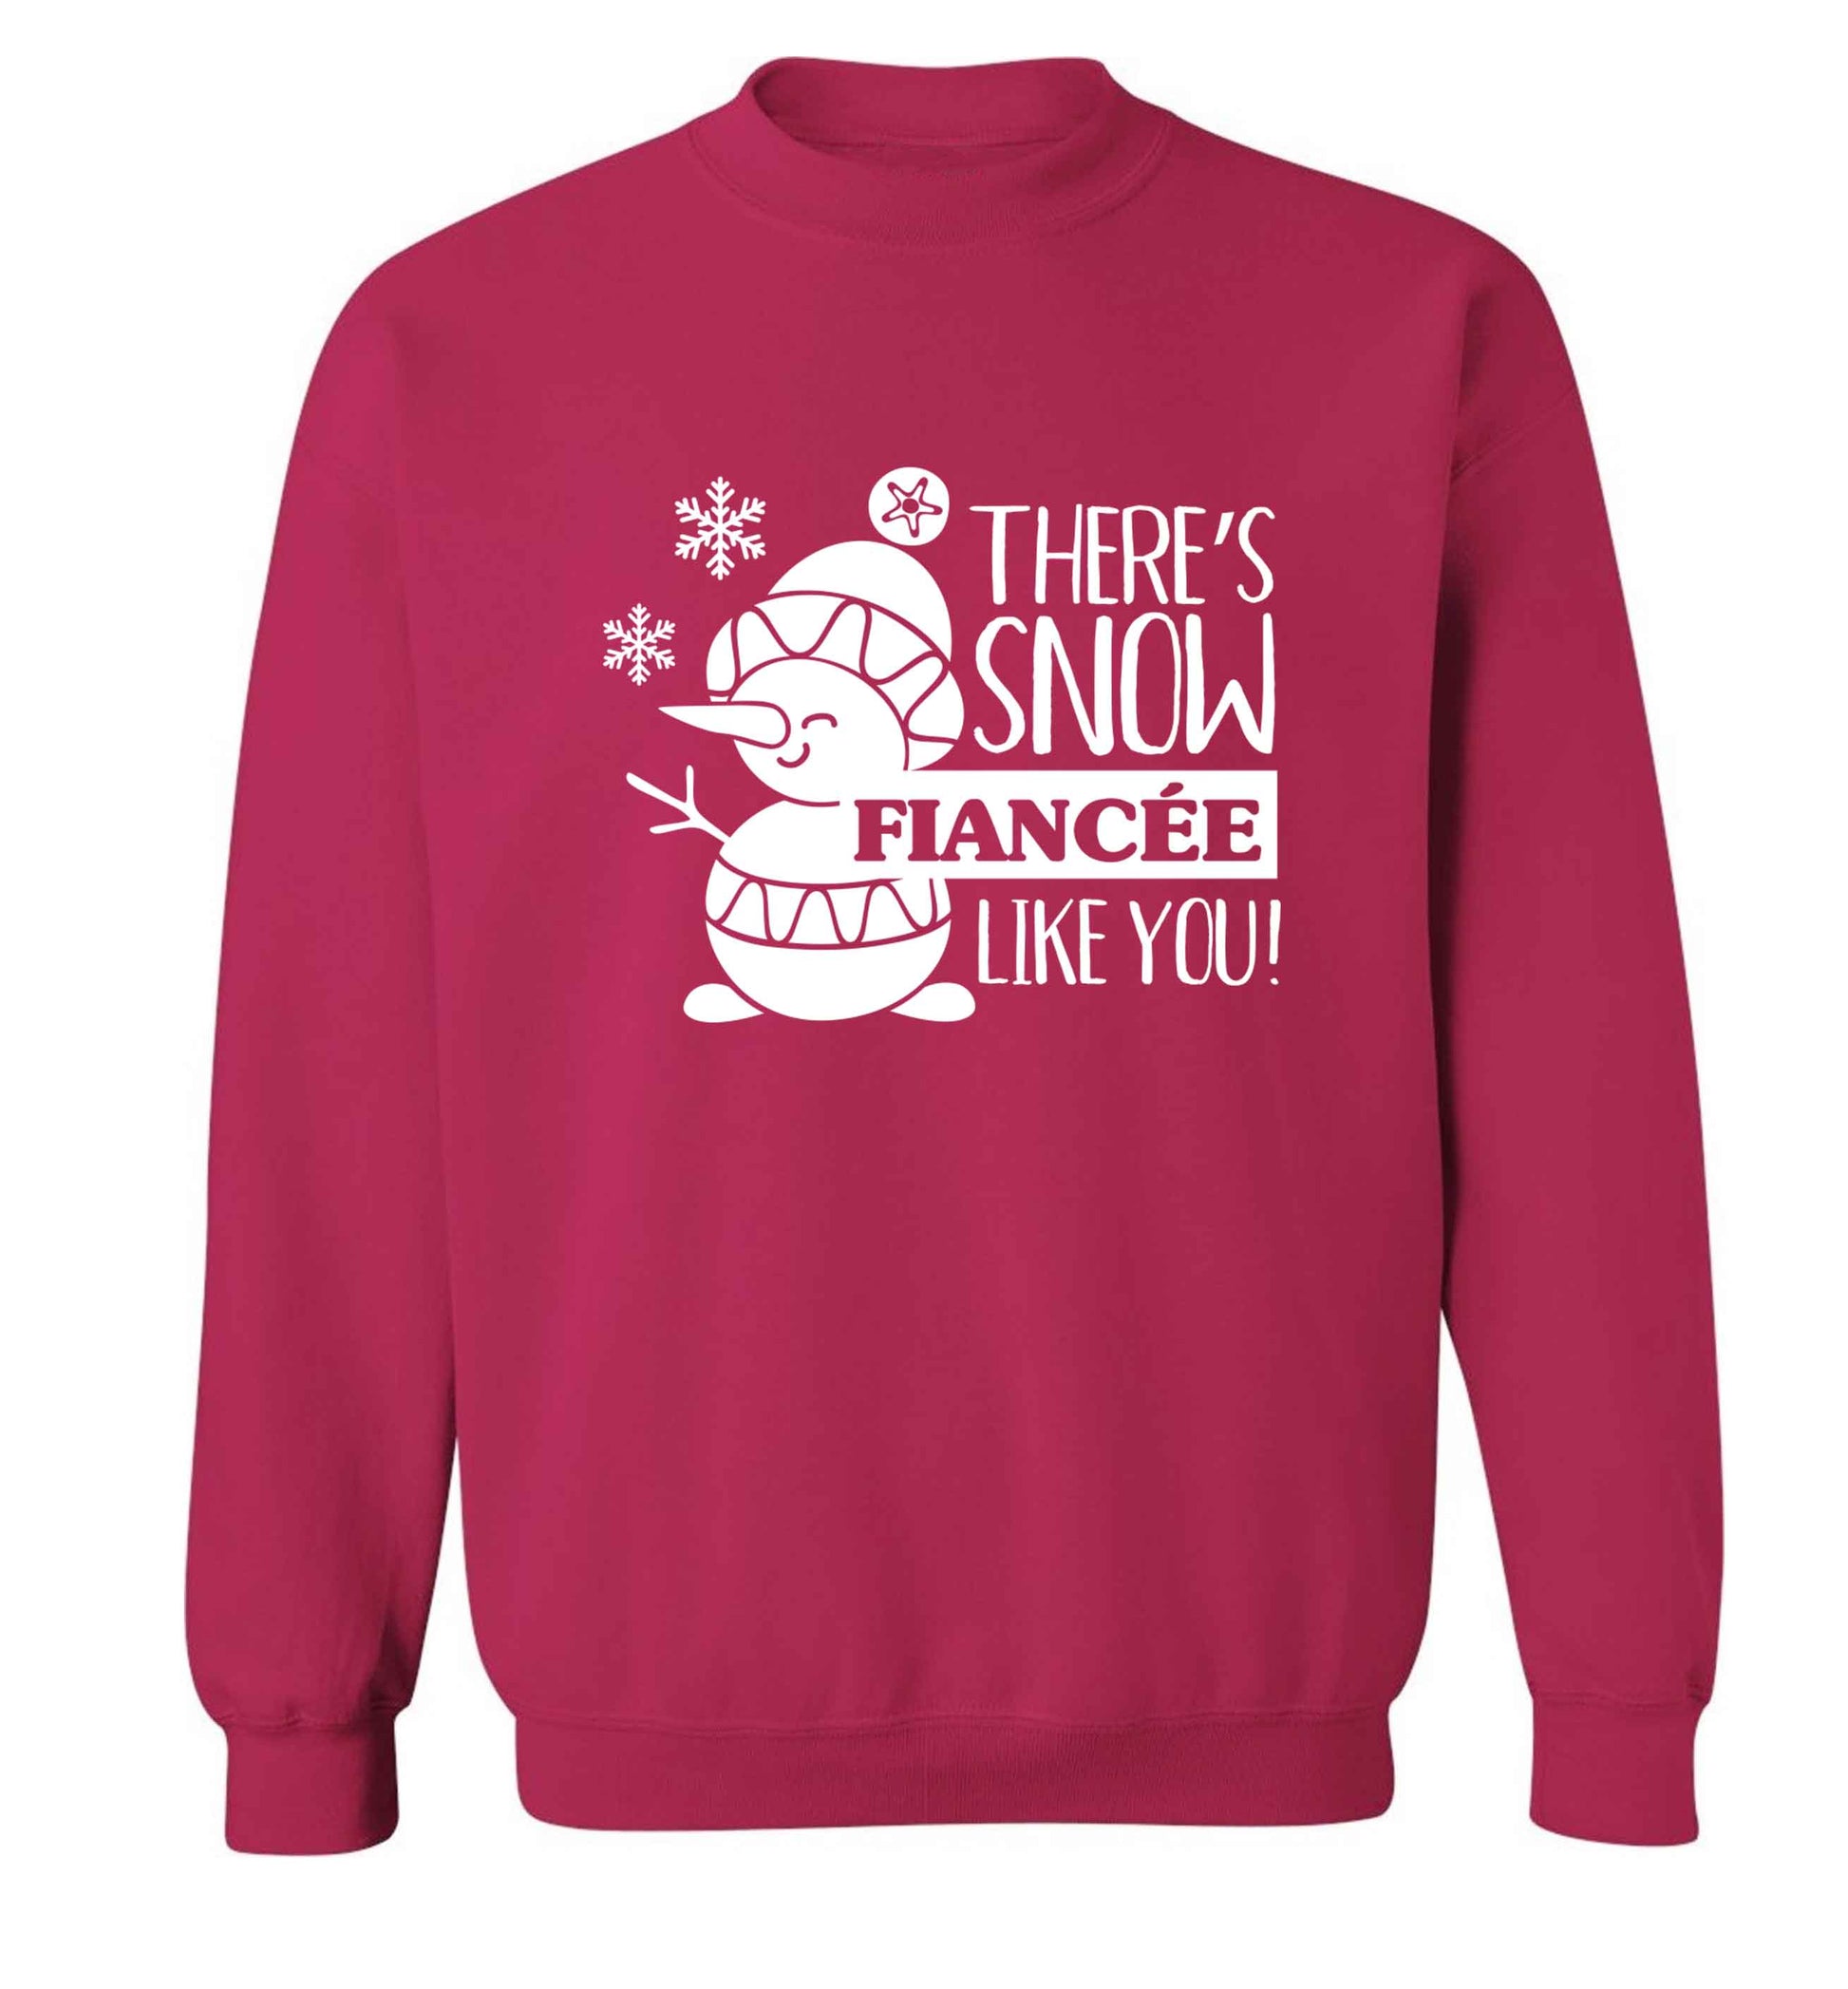 There's snow fiancee like you adult's unisex pink sweater 2XL